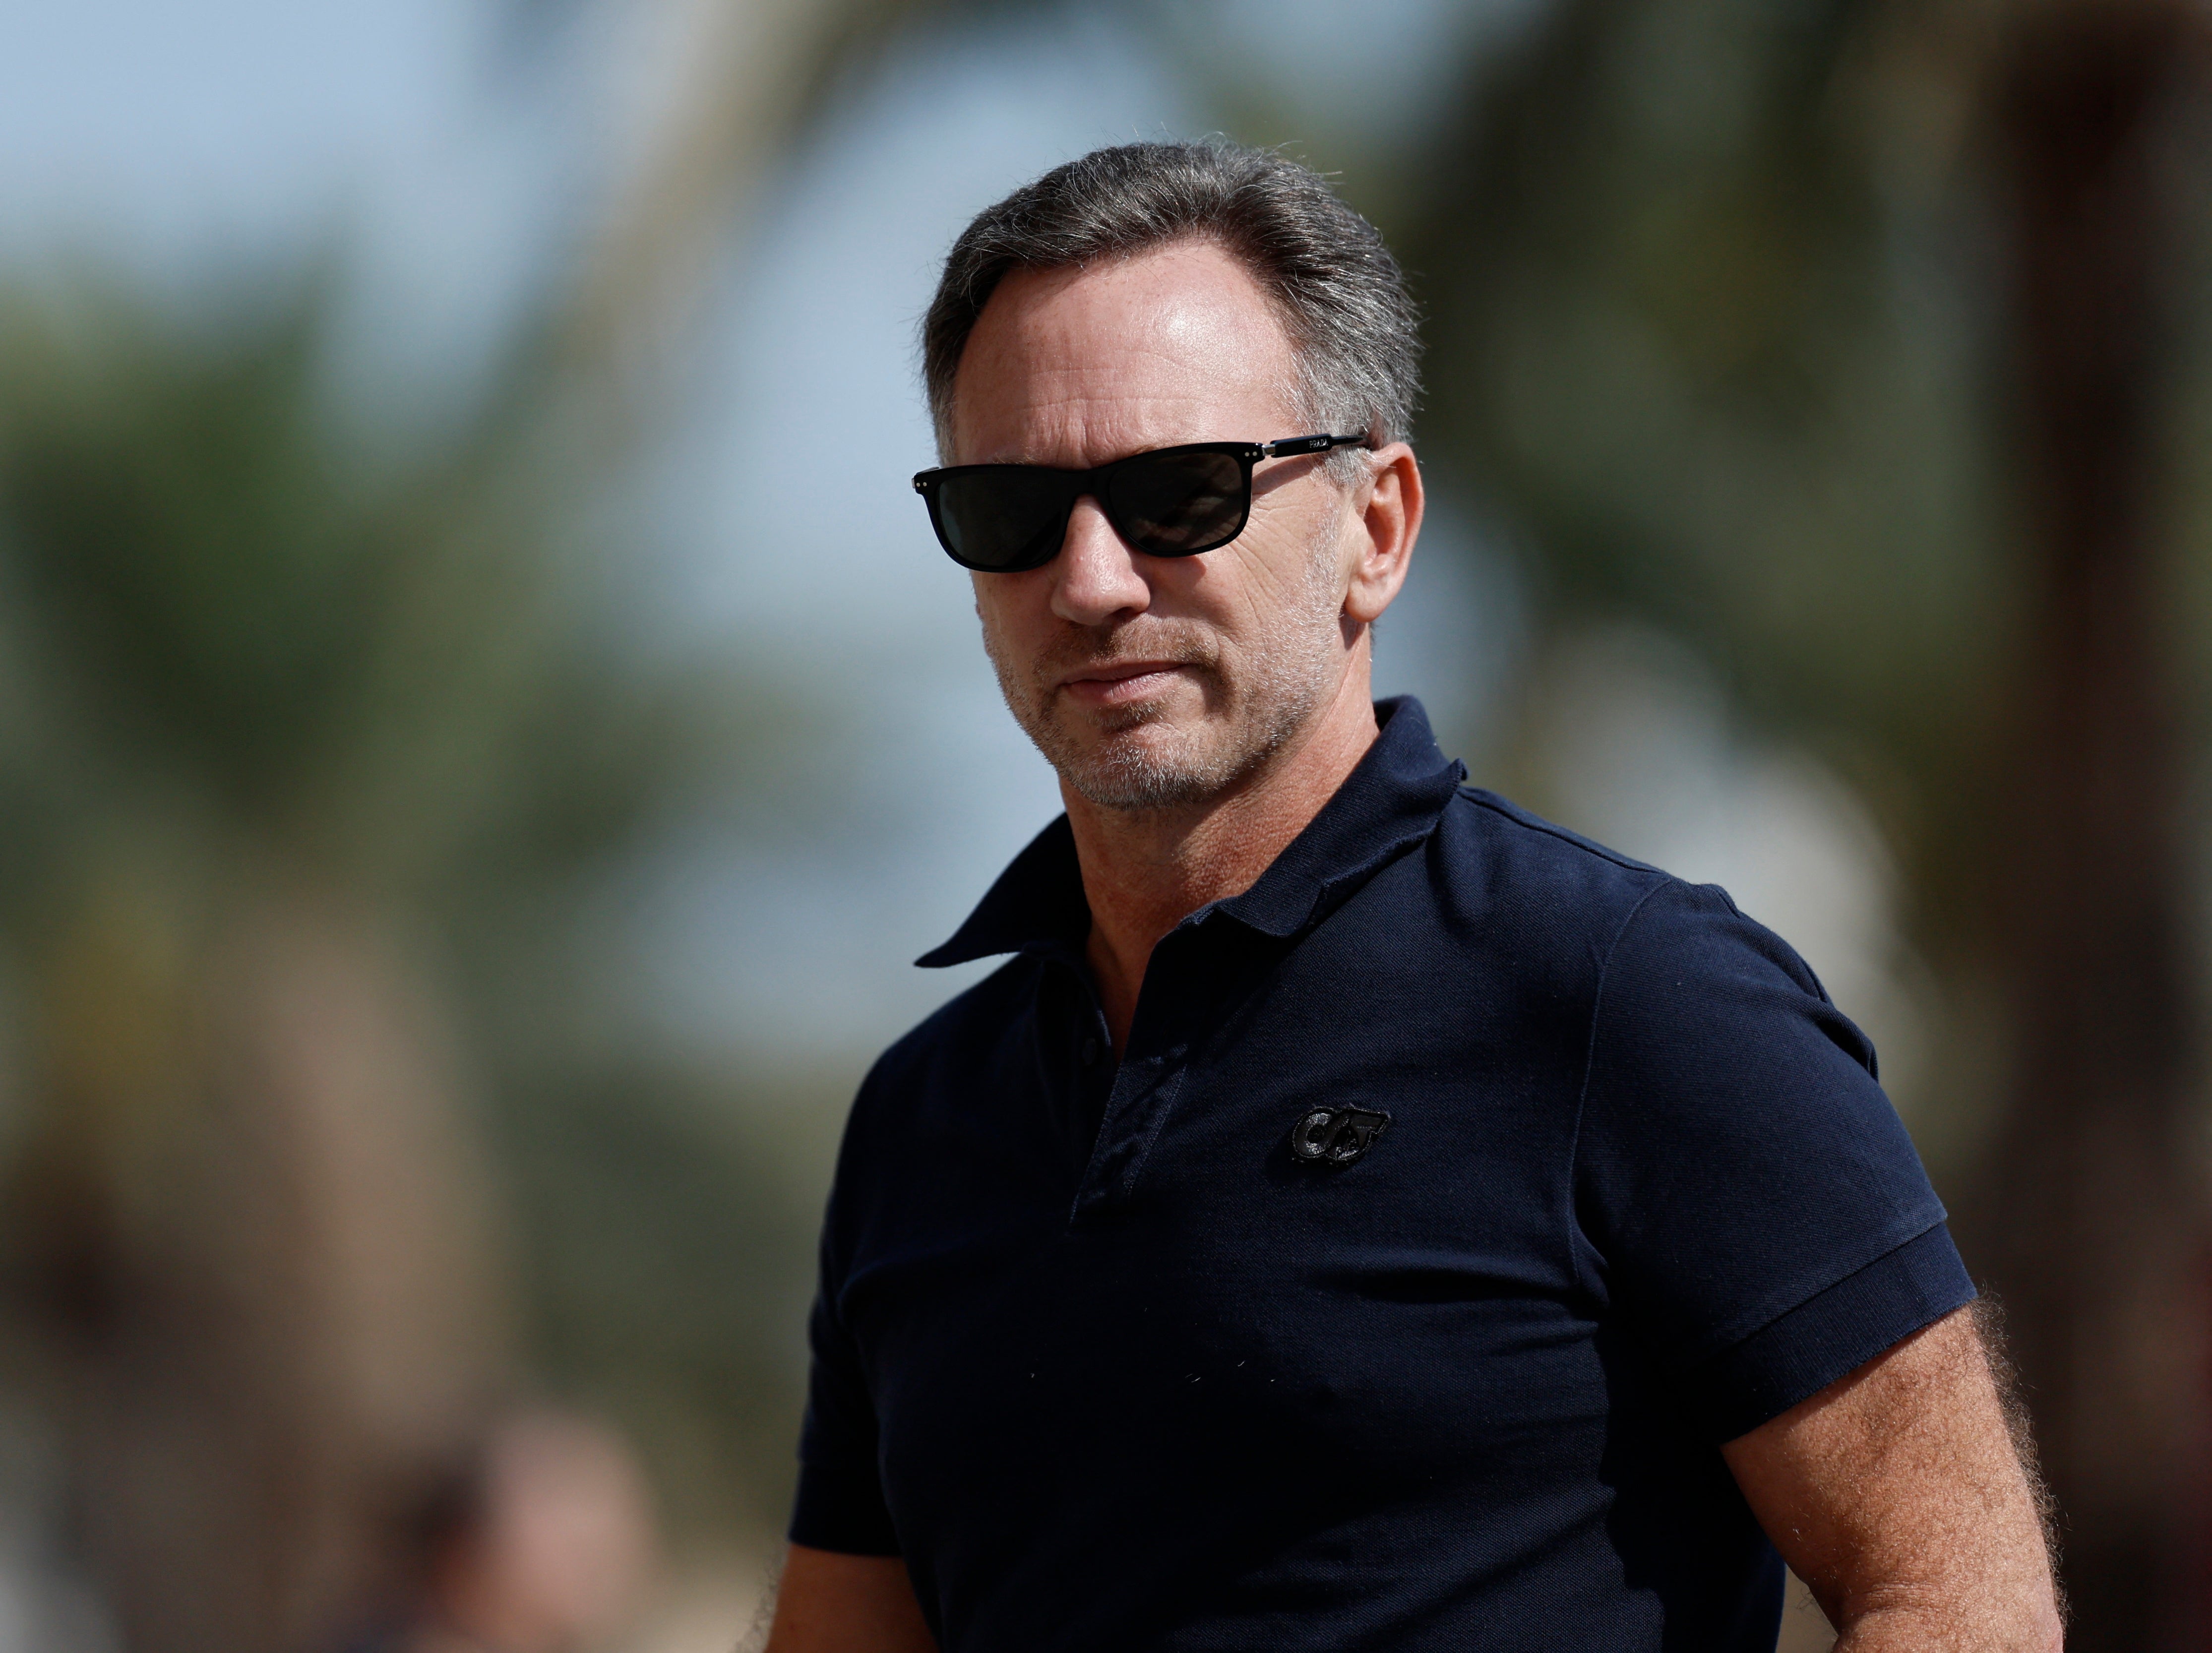 Christian Horner strongly denies allegations of ‘inappropriate behaviour’